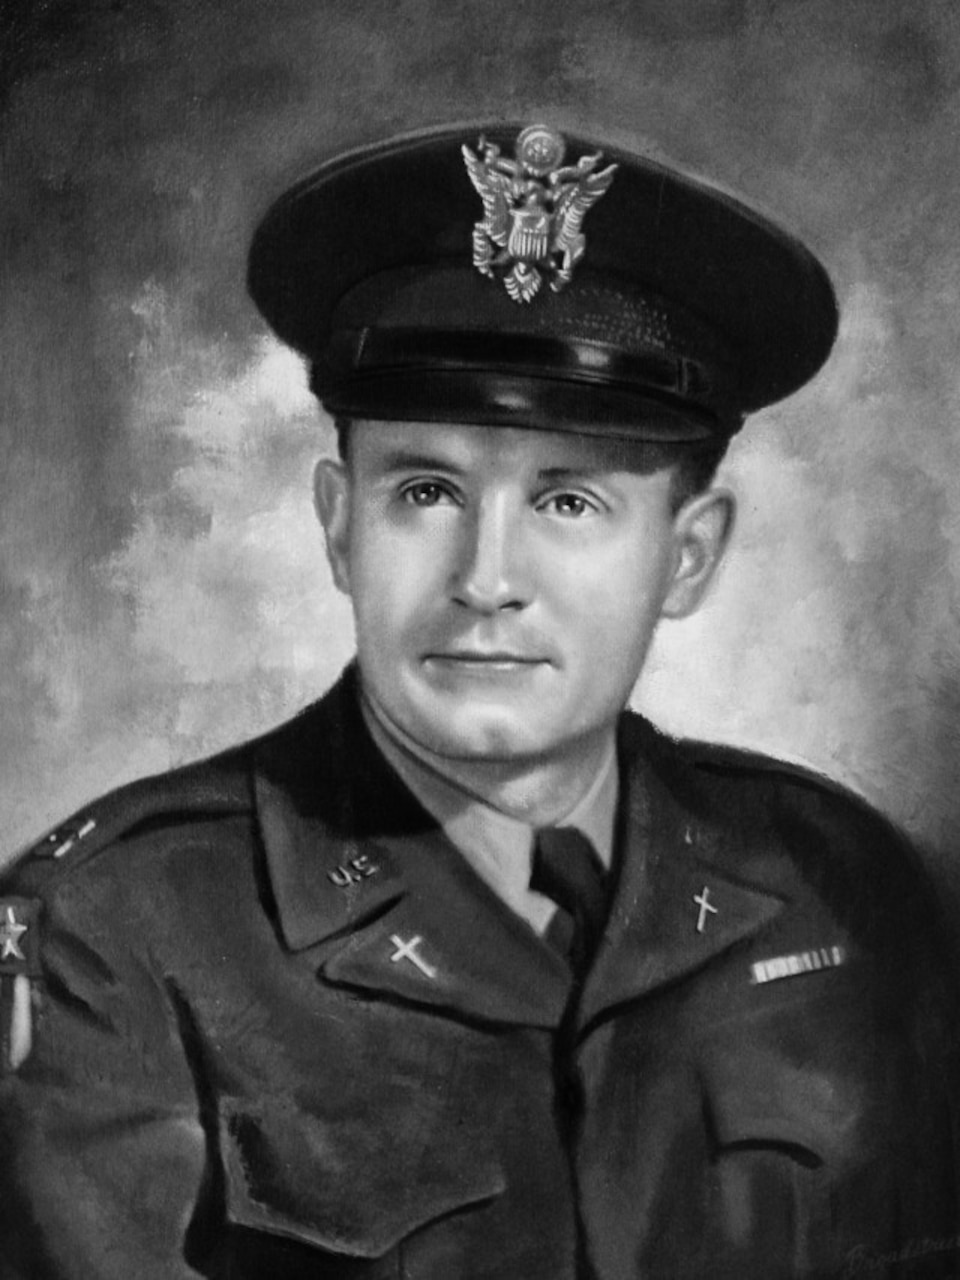 A man in a military uniform and cap poses for a photo.